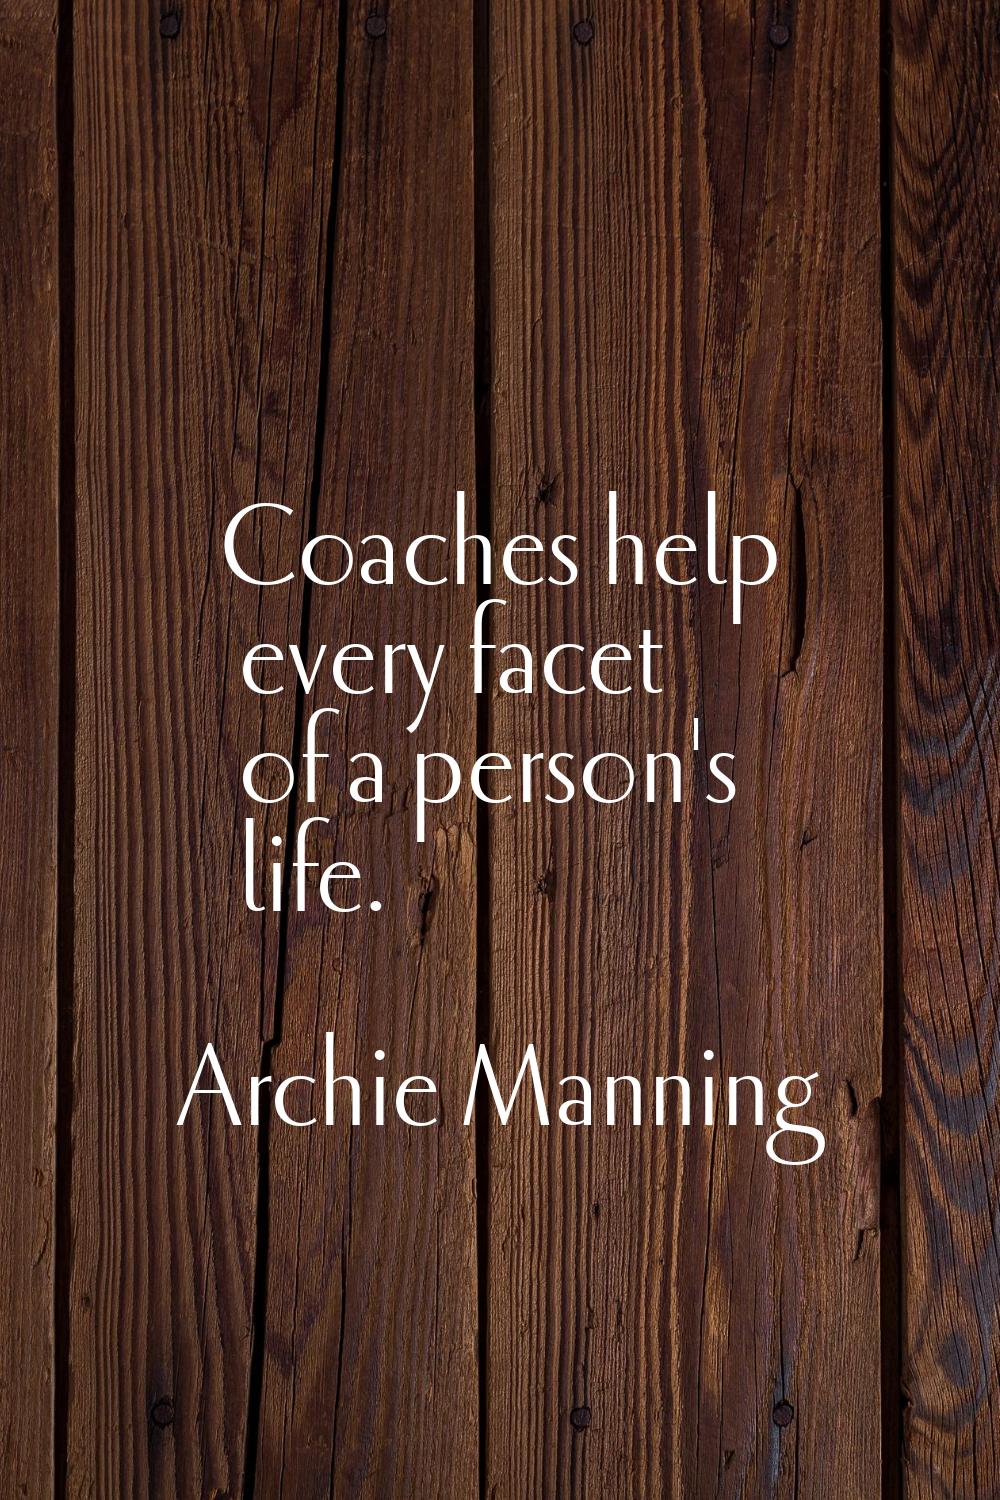 Coaches help every facet of a person's life.